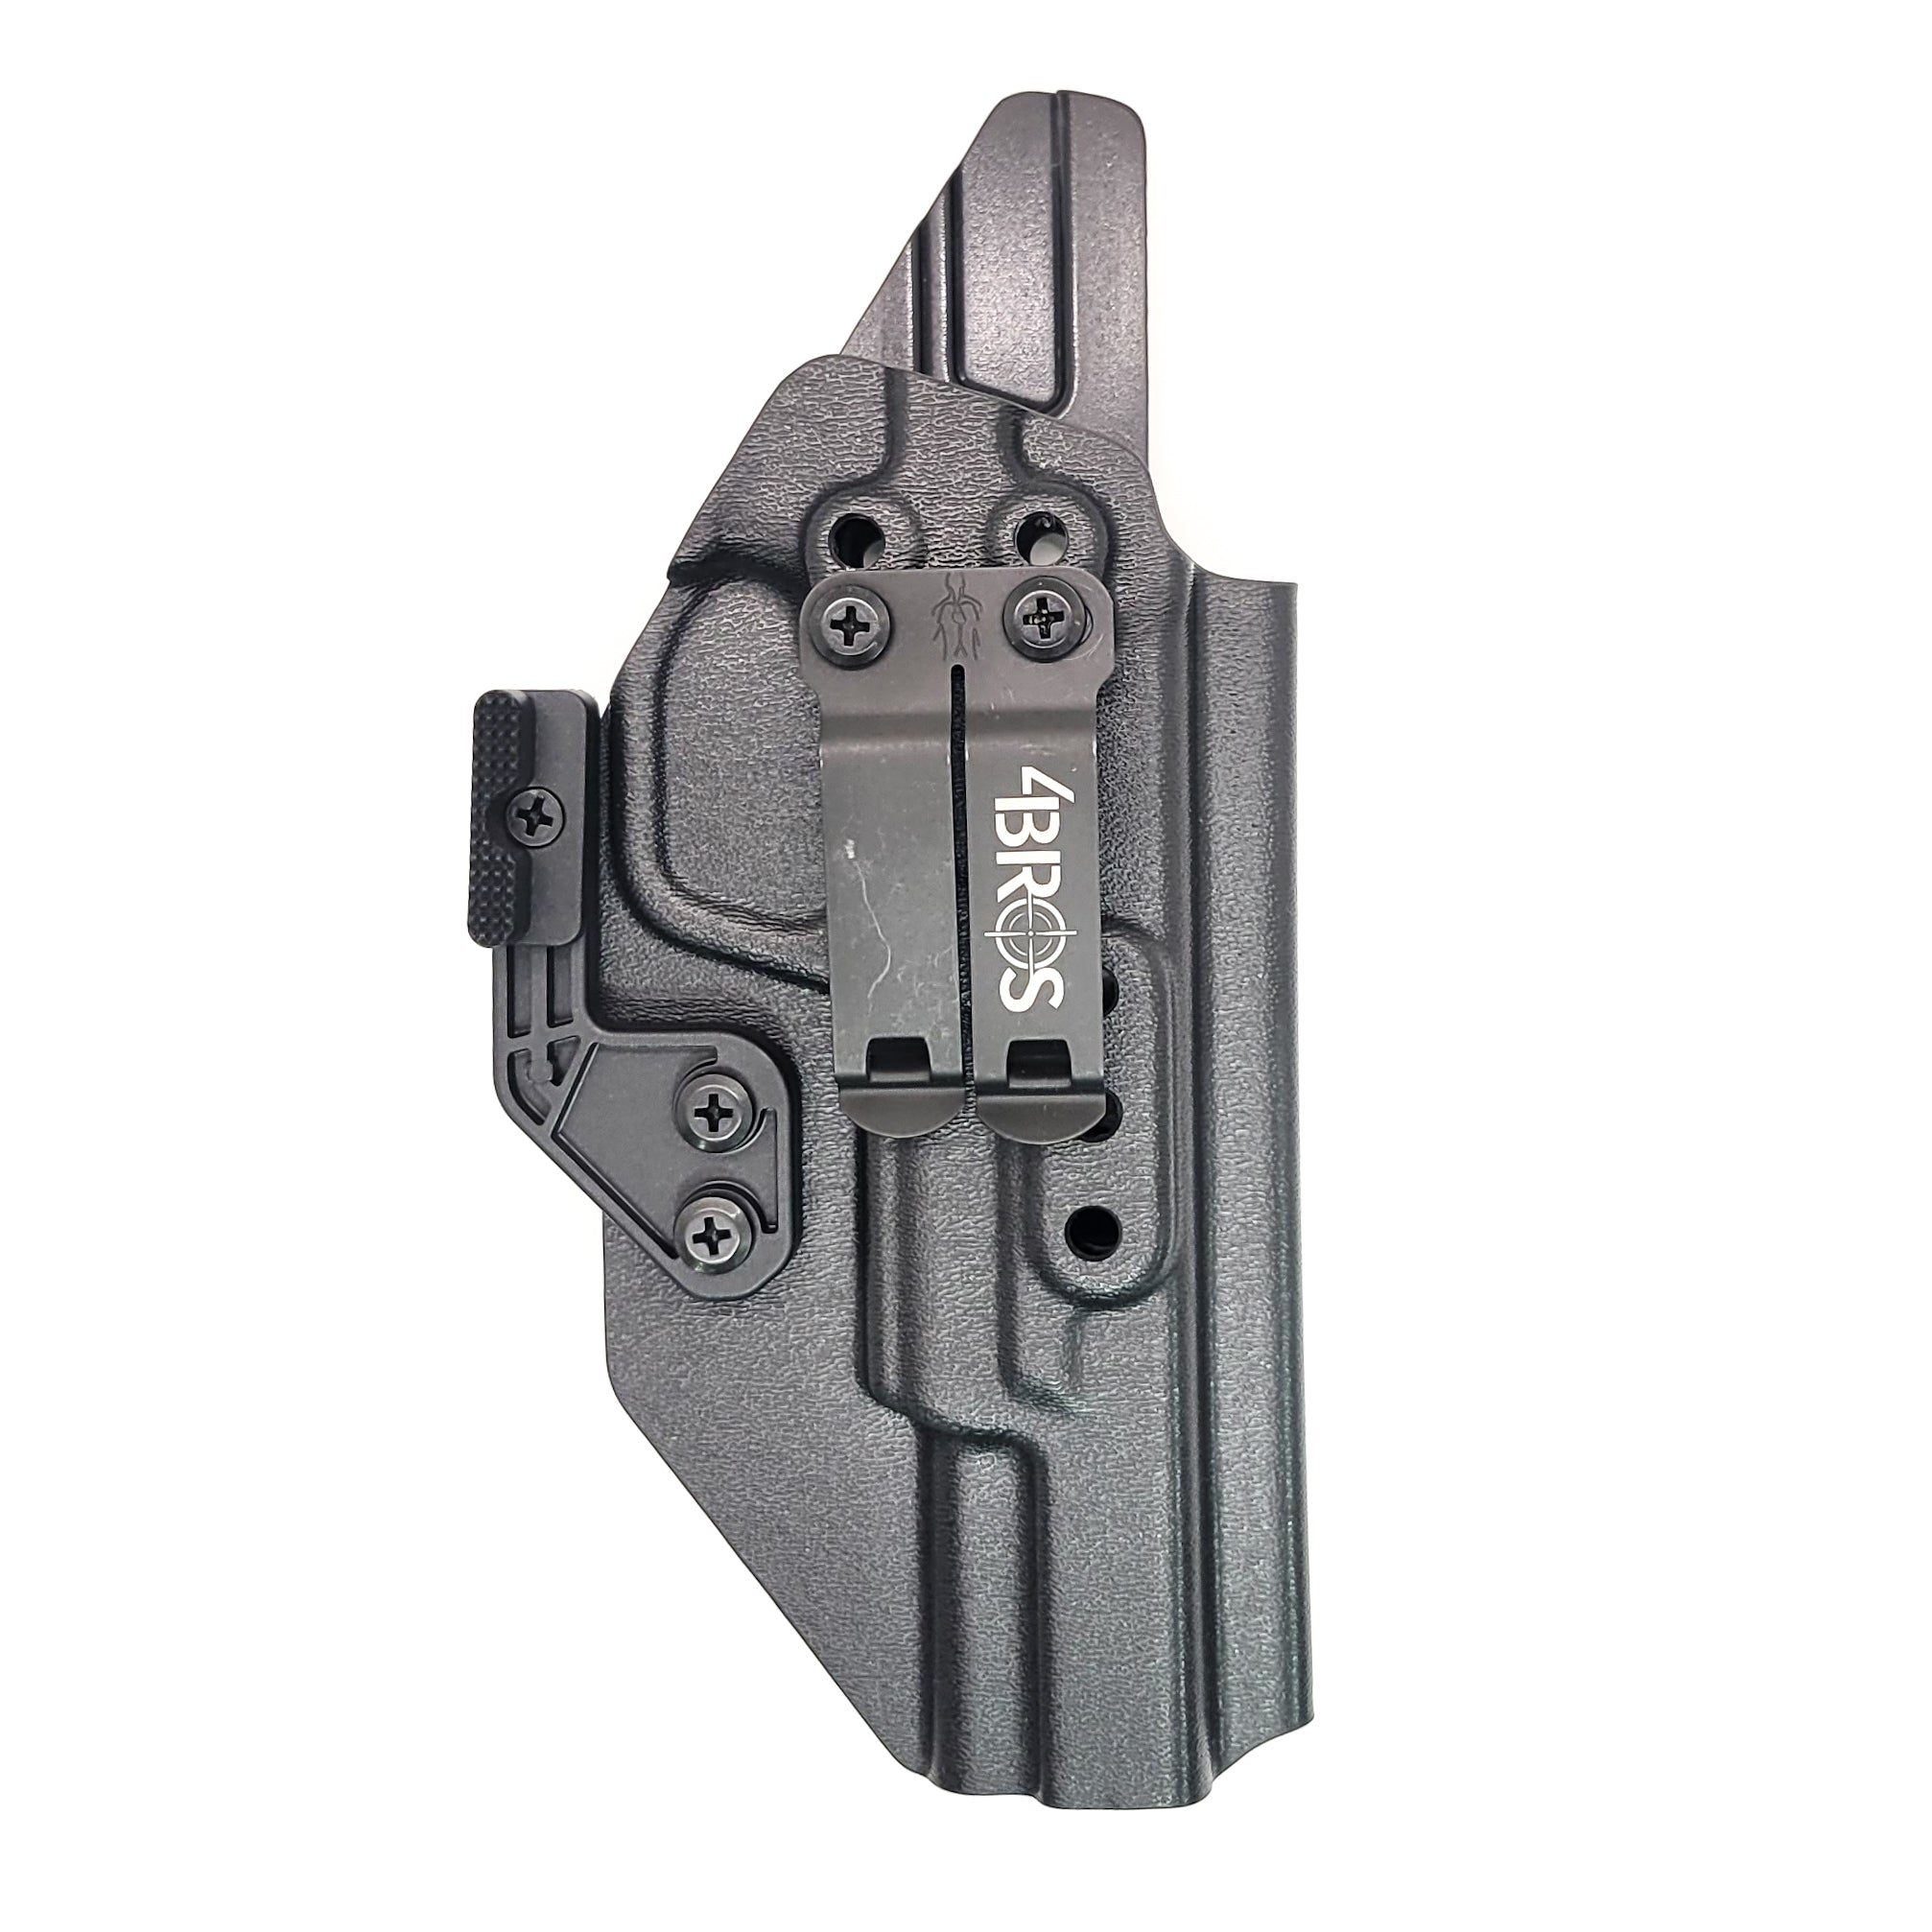 For the Best IWB AIWB Inside Waistband Kydex Taco Holster designed to fit the Smith & Wesson 2023 SPEC Series M&P 9 Metal M2.0 9mm pistol, shop Four Brothers Holsters. Full sweat guard, adjustable retention, profiled for a red dot sight. Proudly made in the USA for veterans and law enforcement.